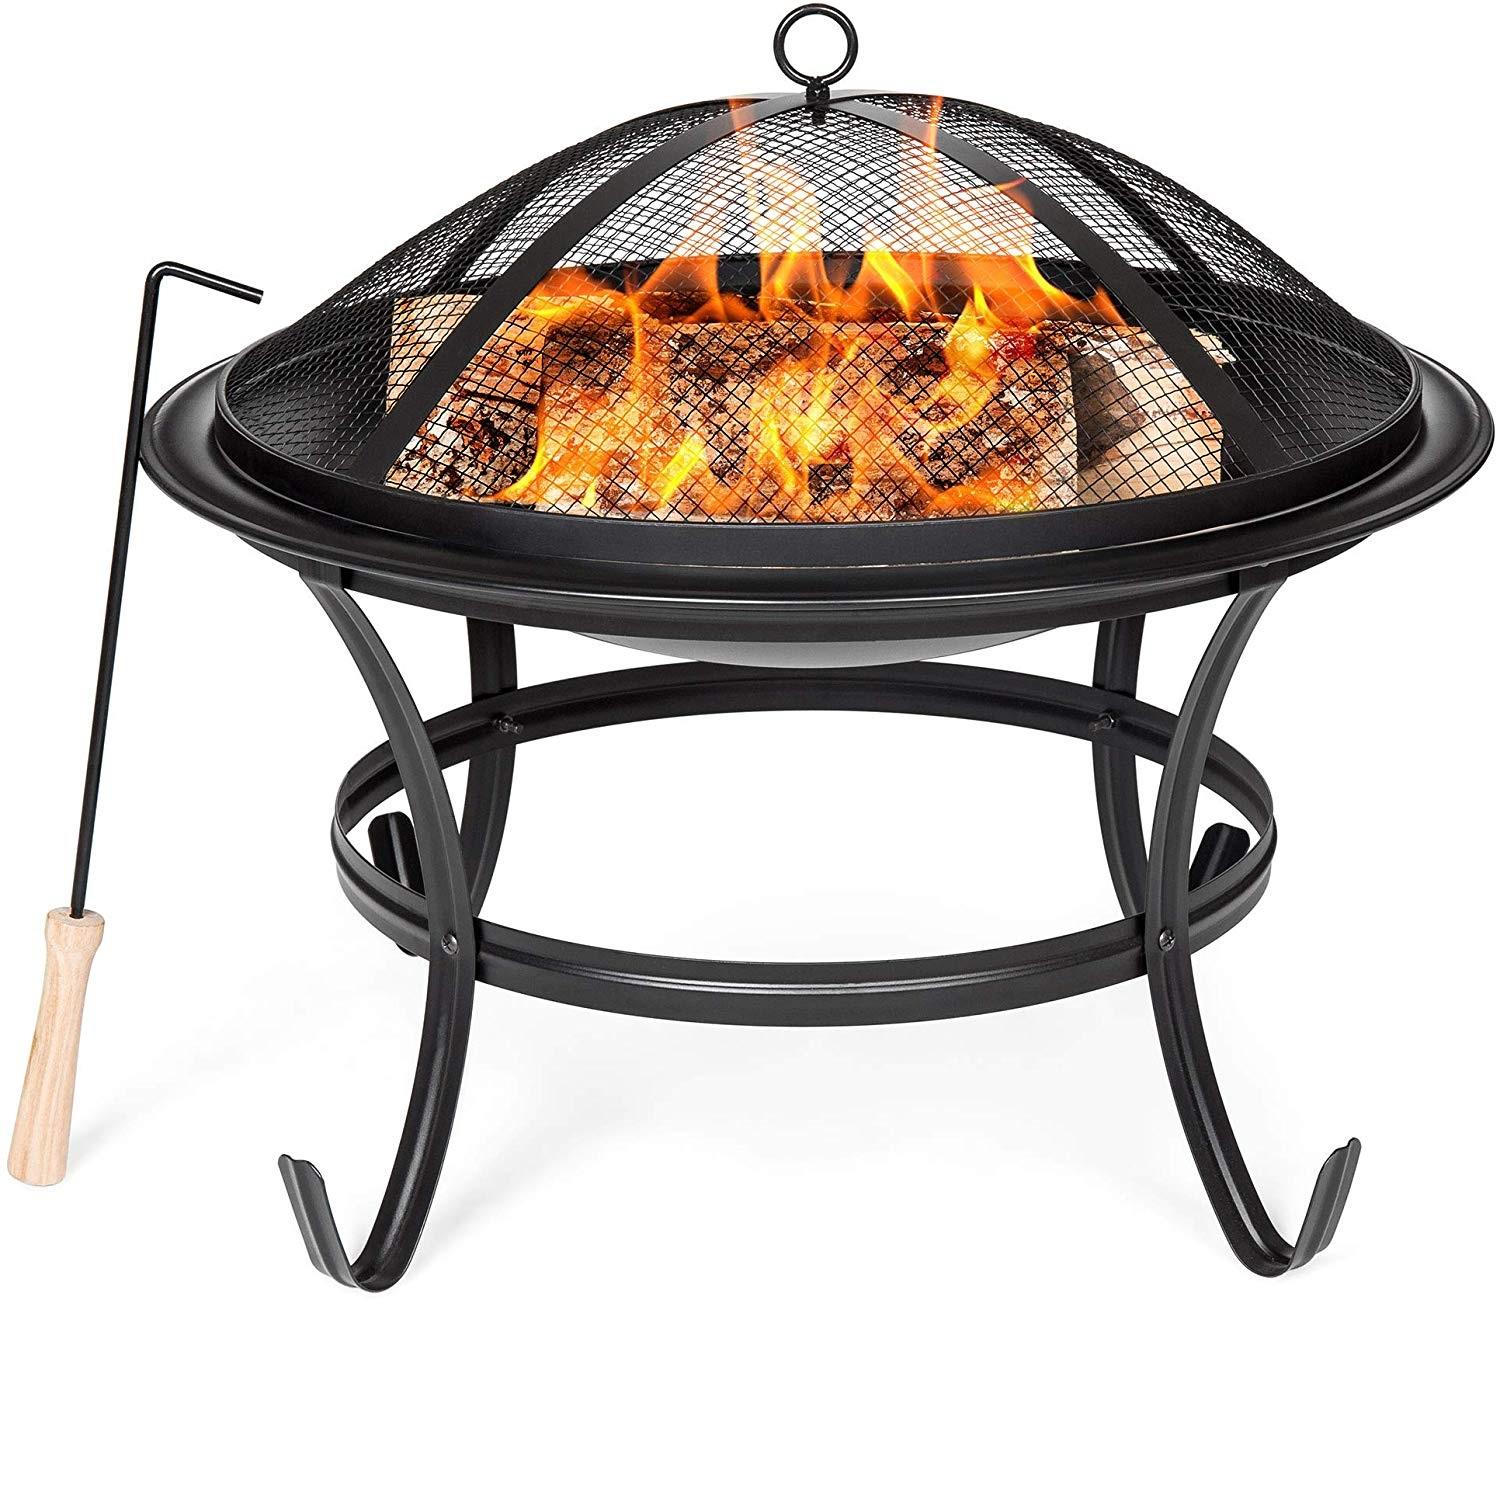 Kingso 22 inch Fire Pit SteelWood Burning Small Firepit with Spark Screen Log Grate Poker